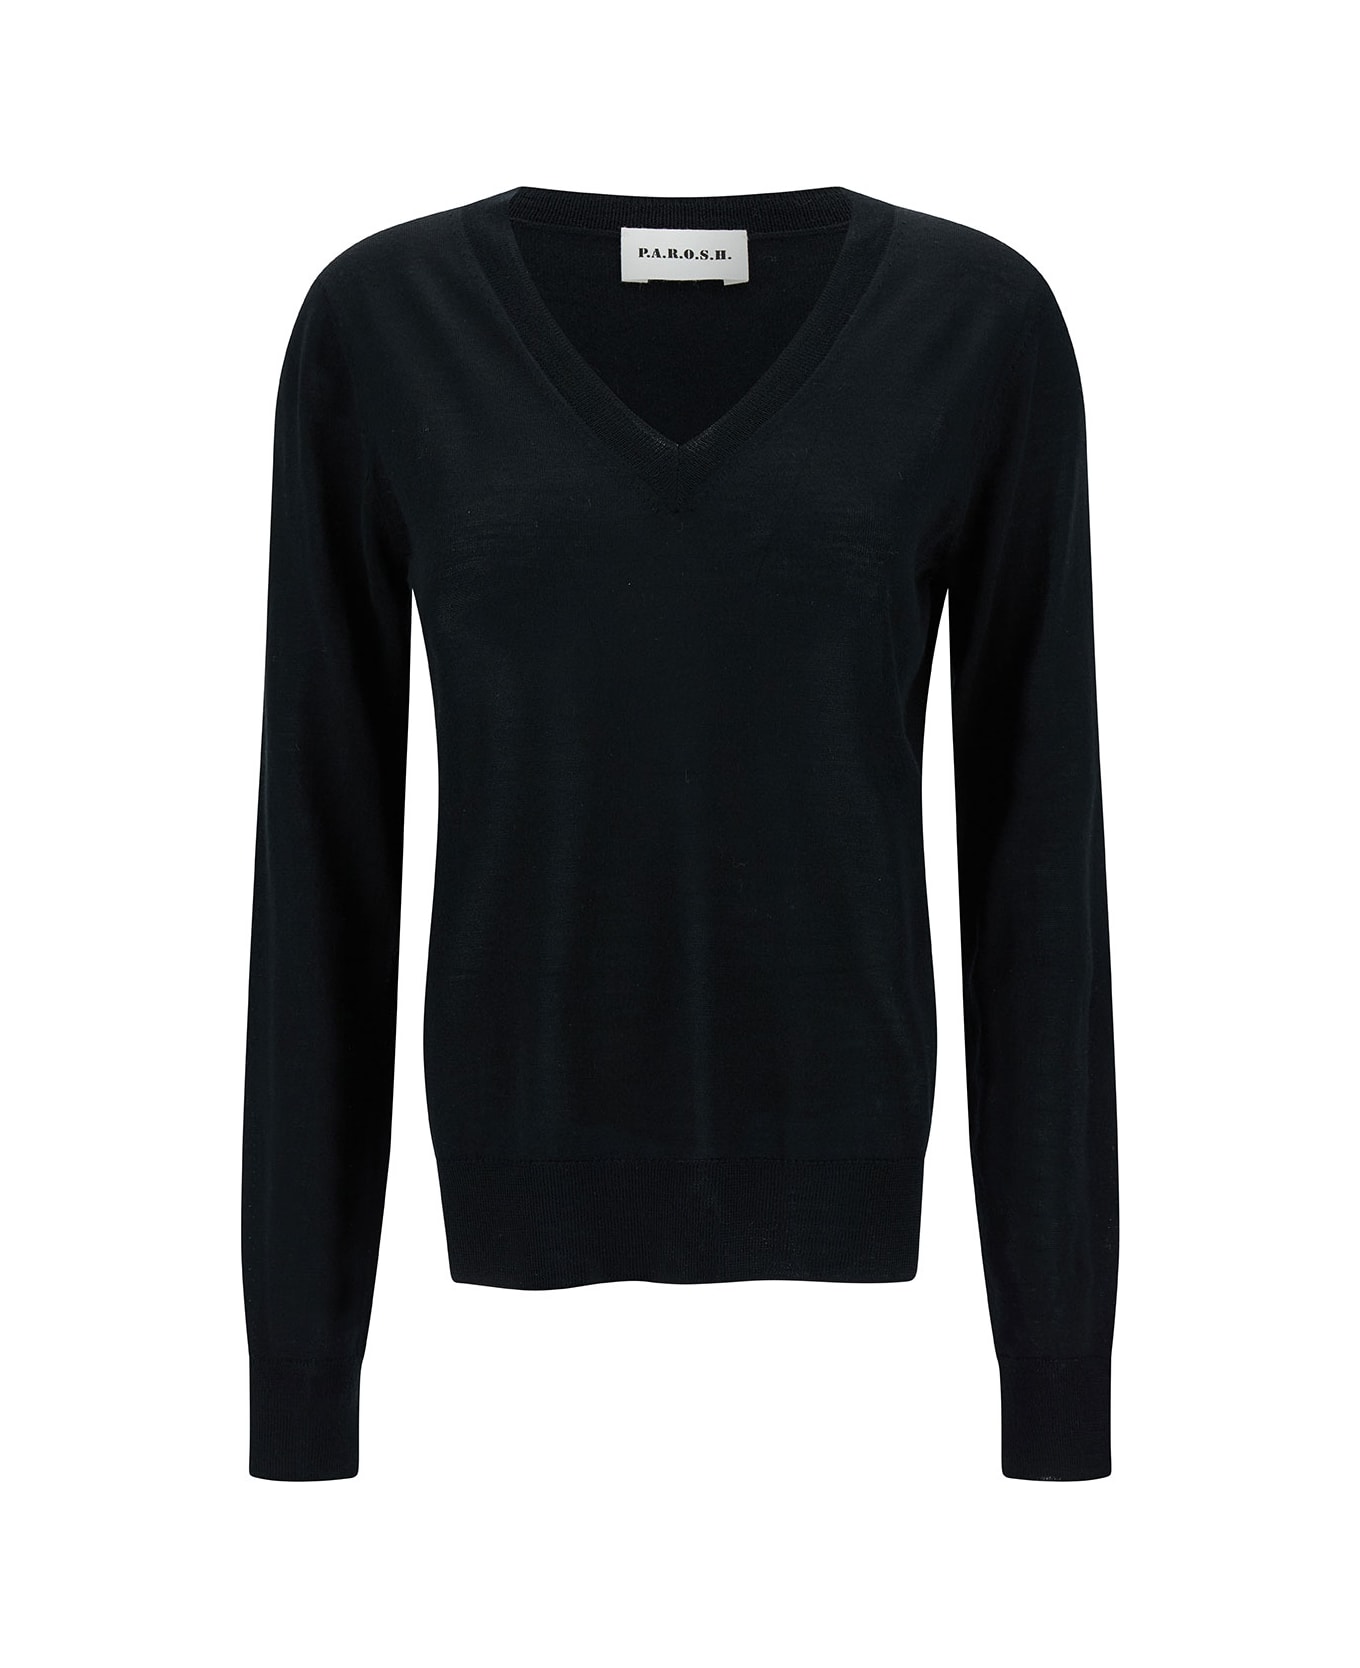 Parosh Black Pullover With V Neckline And Ribbed Trim In Wool And Silk Blend Woman - Black